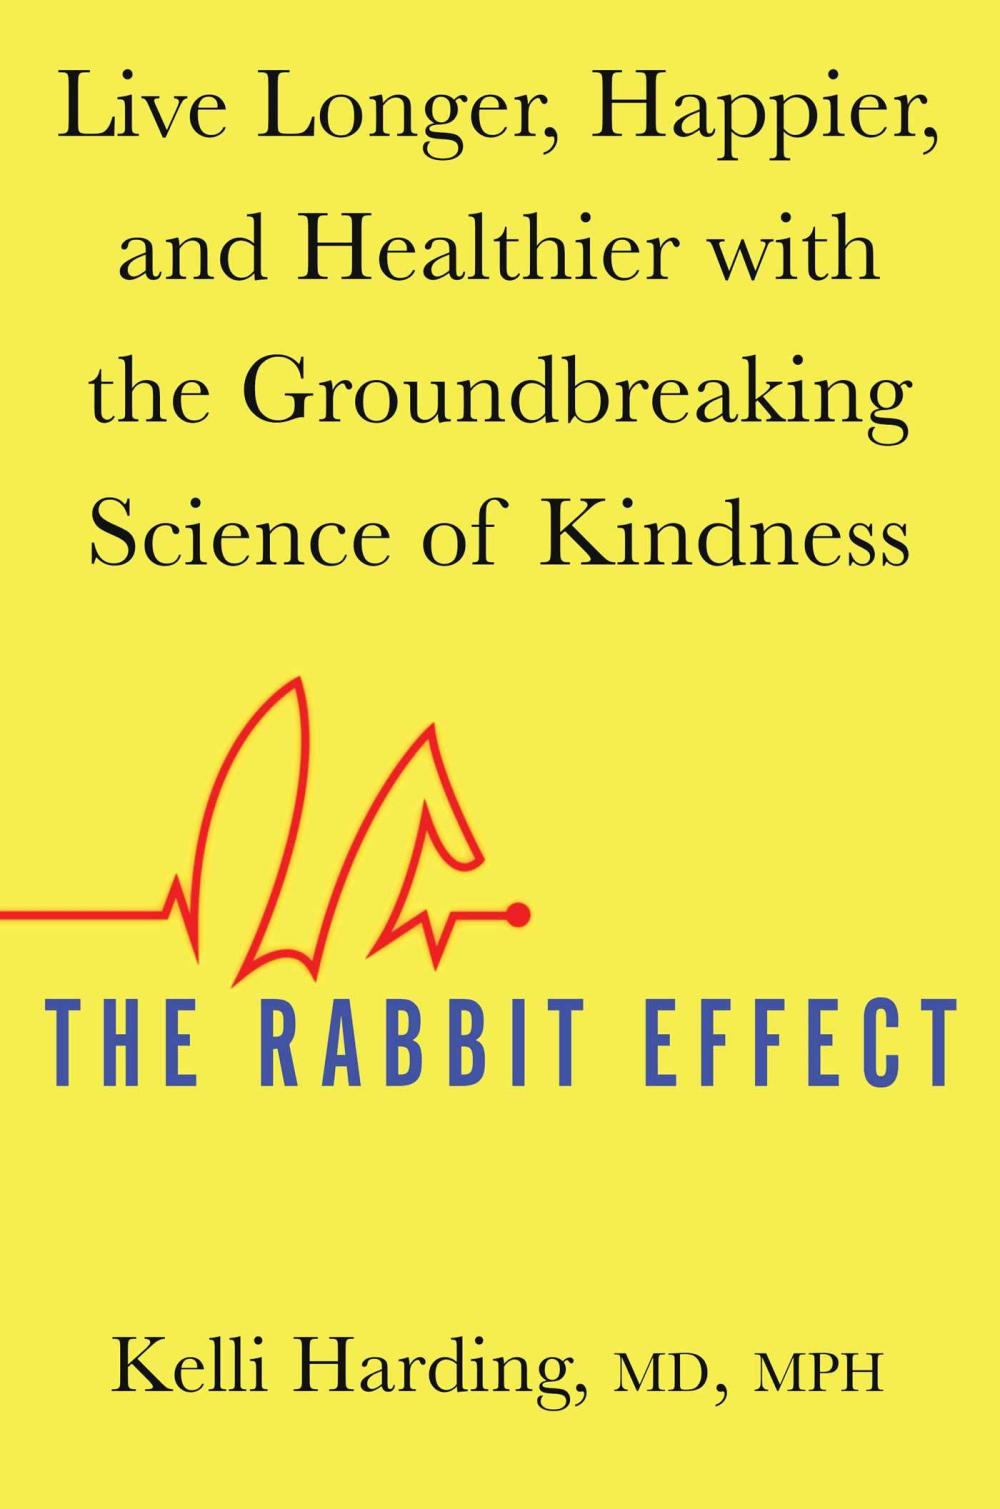 the rabbit effect book cover